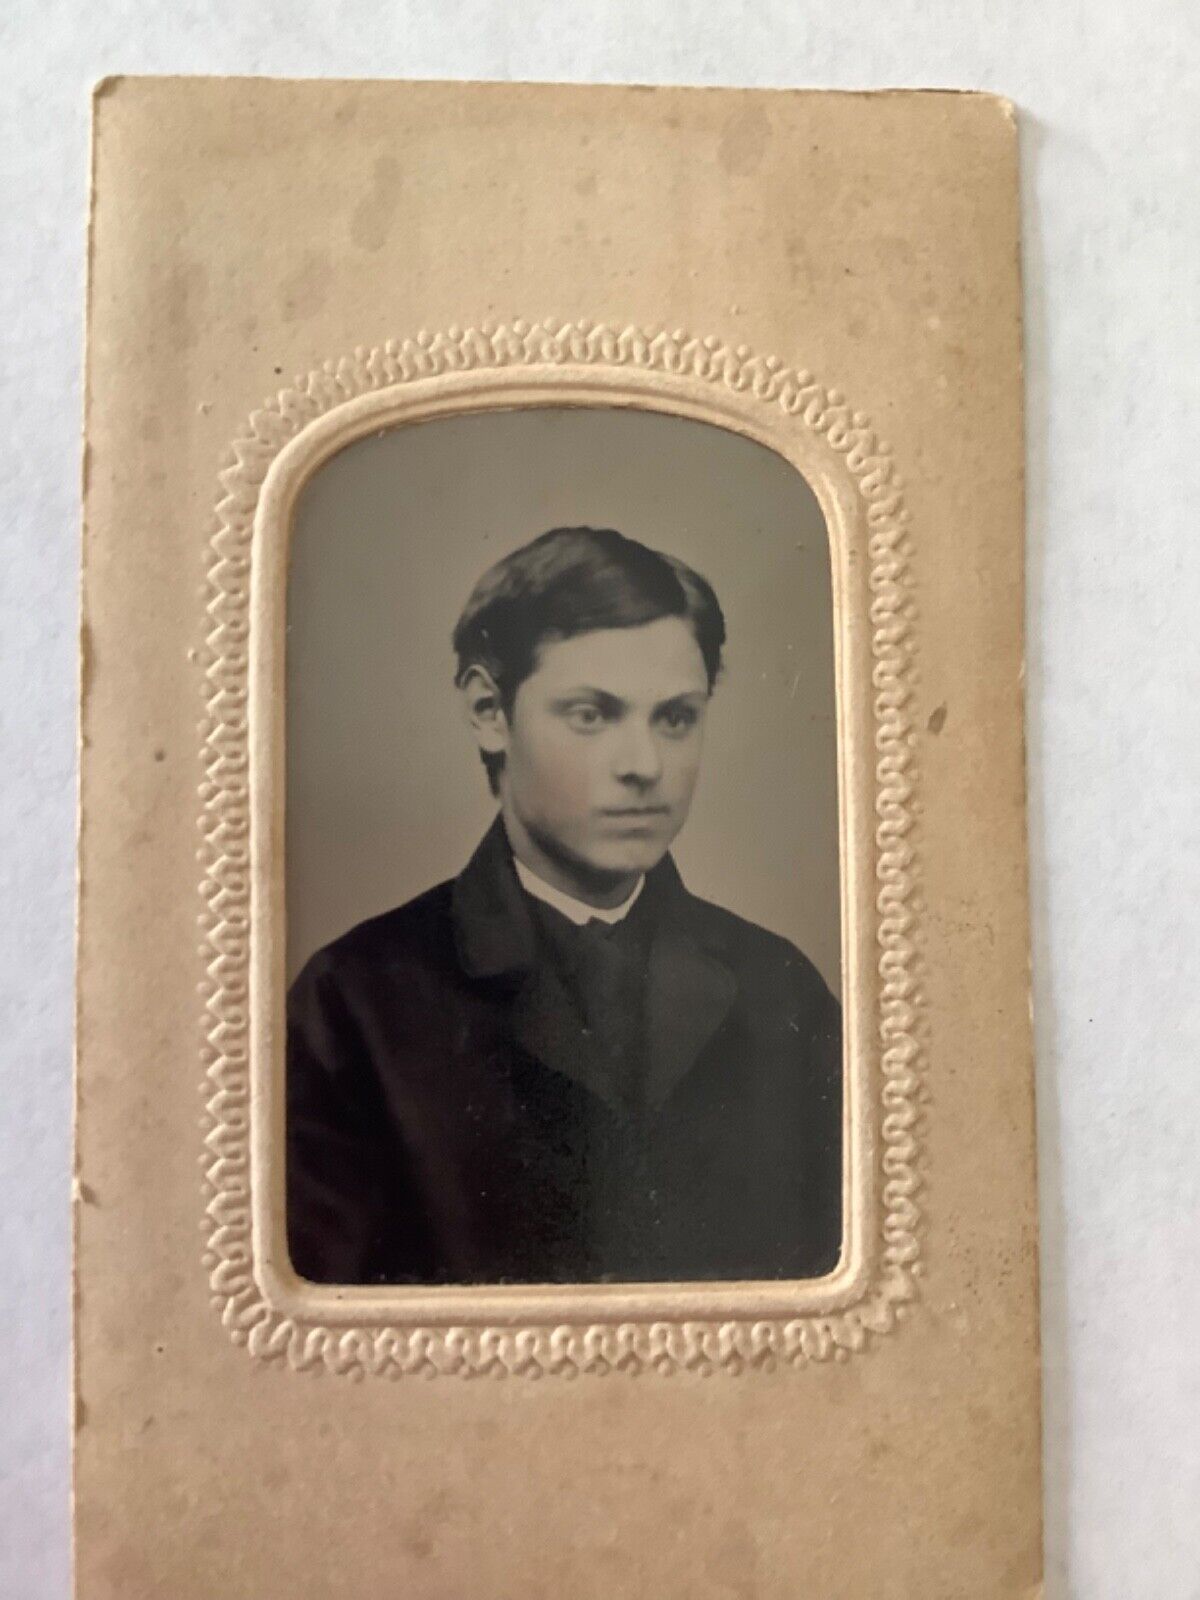 TINTYPE OF A VERY HANSOME YOUNG MAN